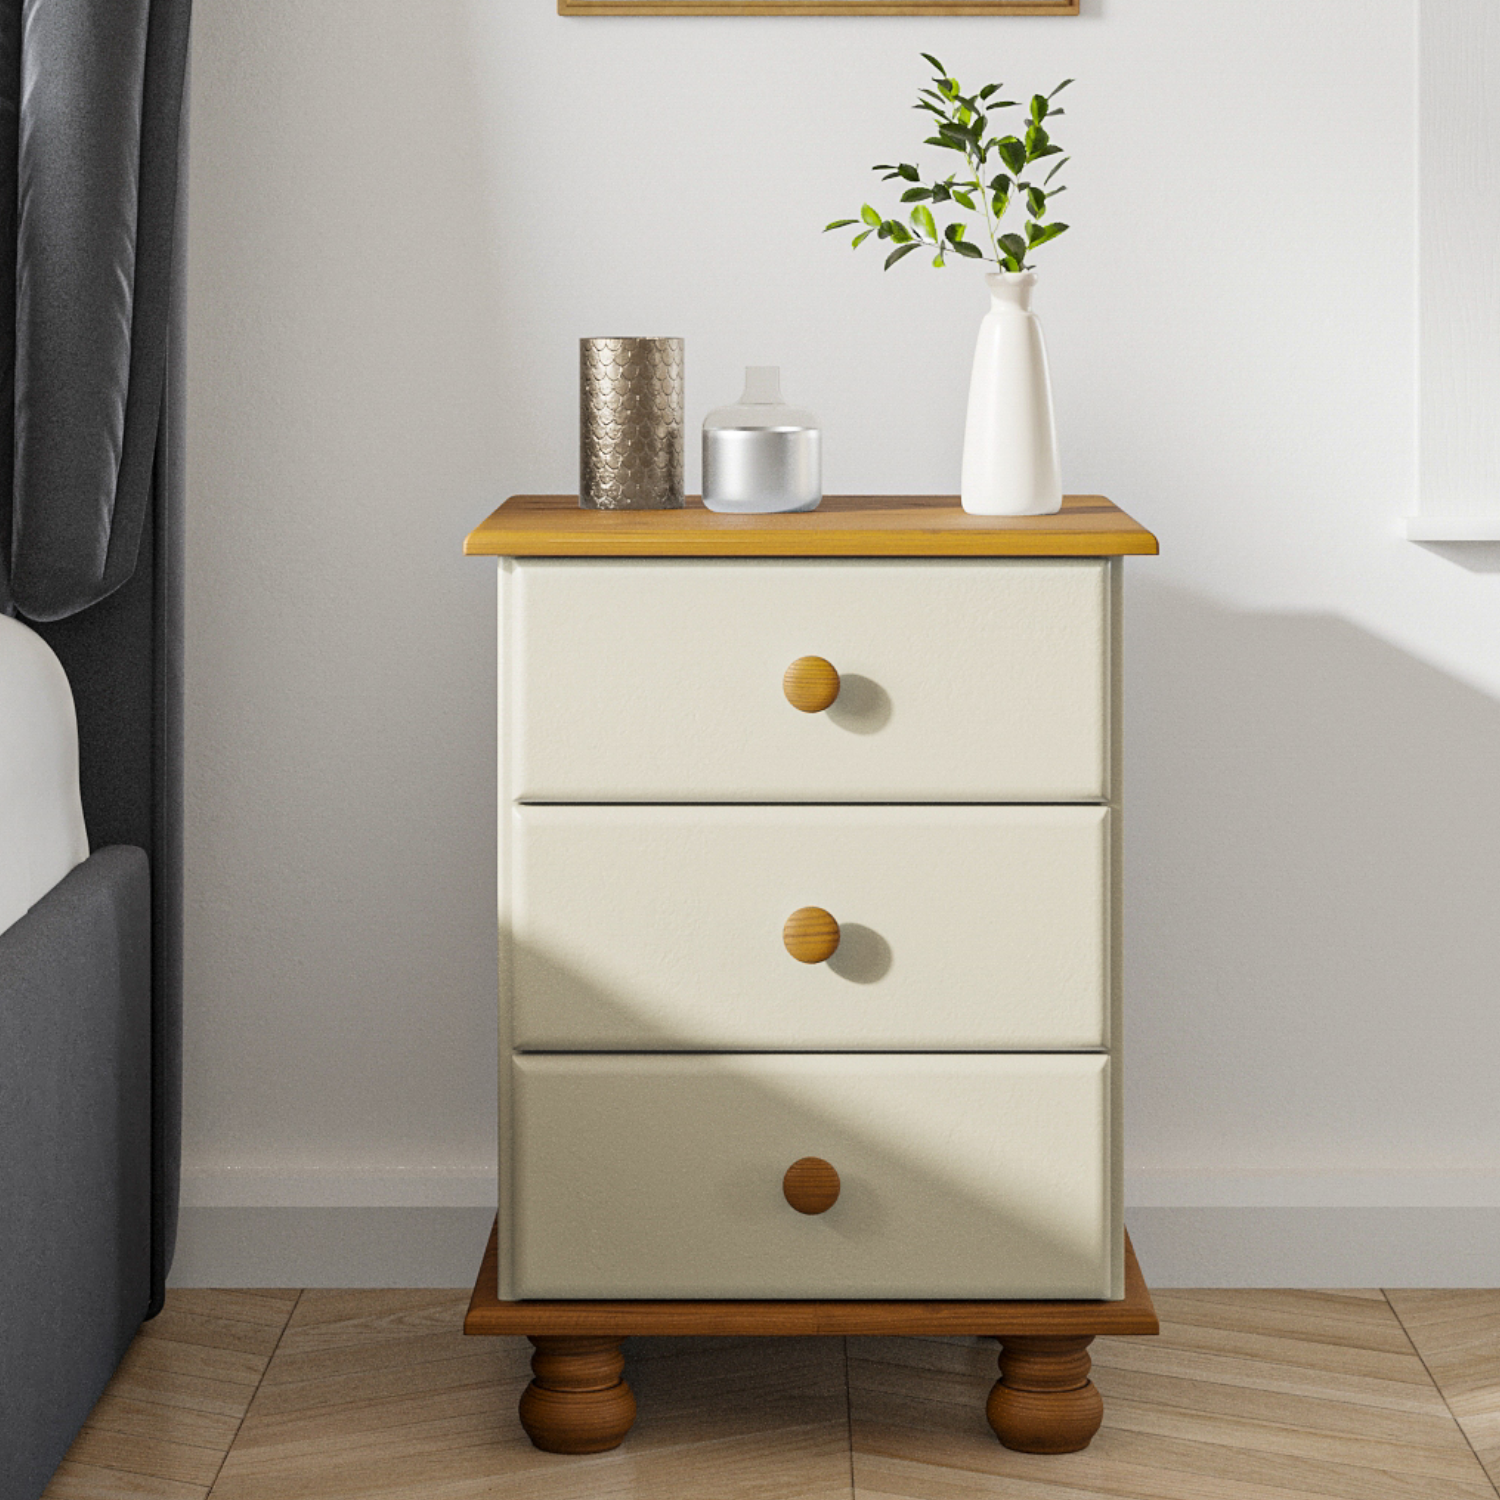 Photo of Cream and pine 3 drawer bedside table - hamilton